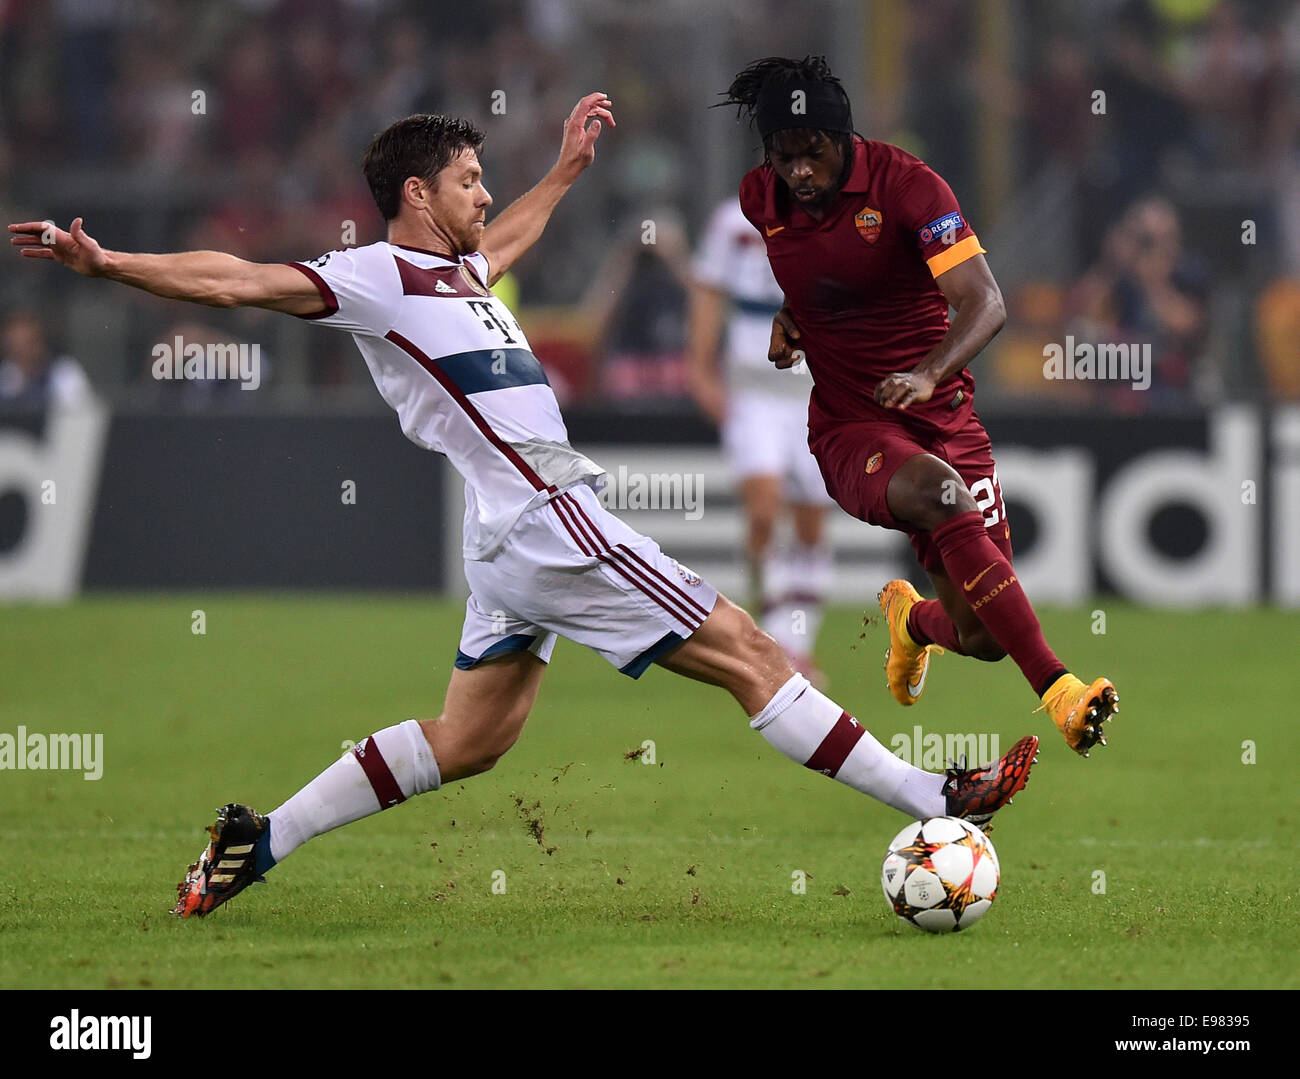 Rome, Italy. 21st Oct, 2014. Bayern Munich's Xabi Alonso (L) vies with Roma's Yao Kouassi Gervinho during their Champions League soccer match at the Olympic stadium in Rome, Italy, Oct. 21, 2014. Bayern won 7-1. Credit:  Alberto Lingria/Xinhua/Alamy Live News Stock Photo